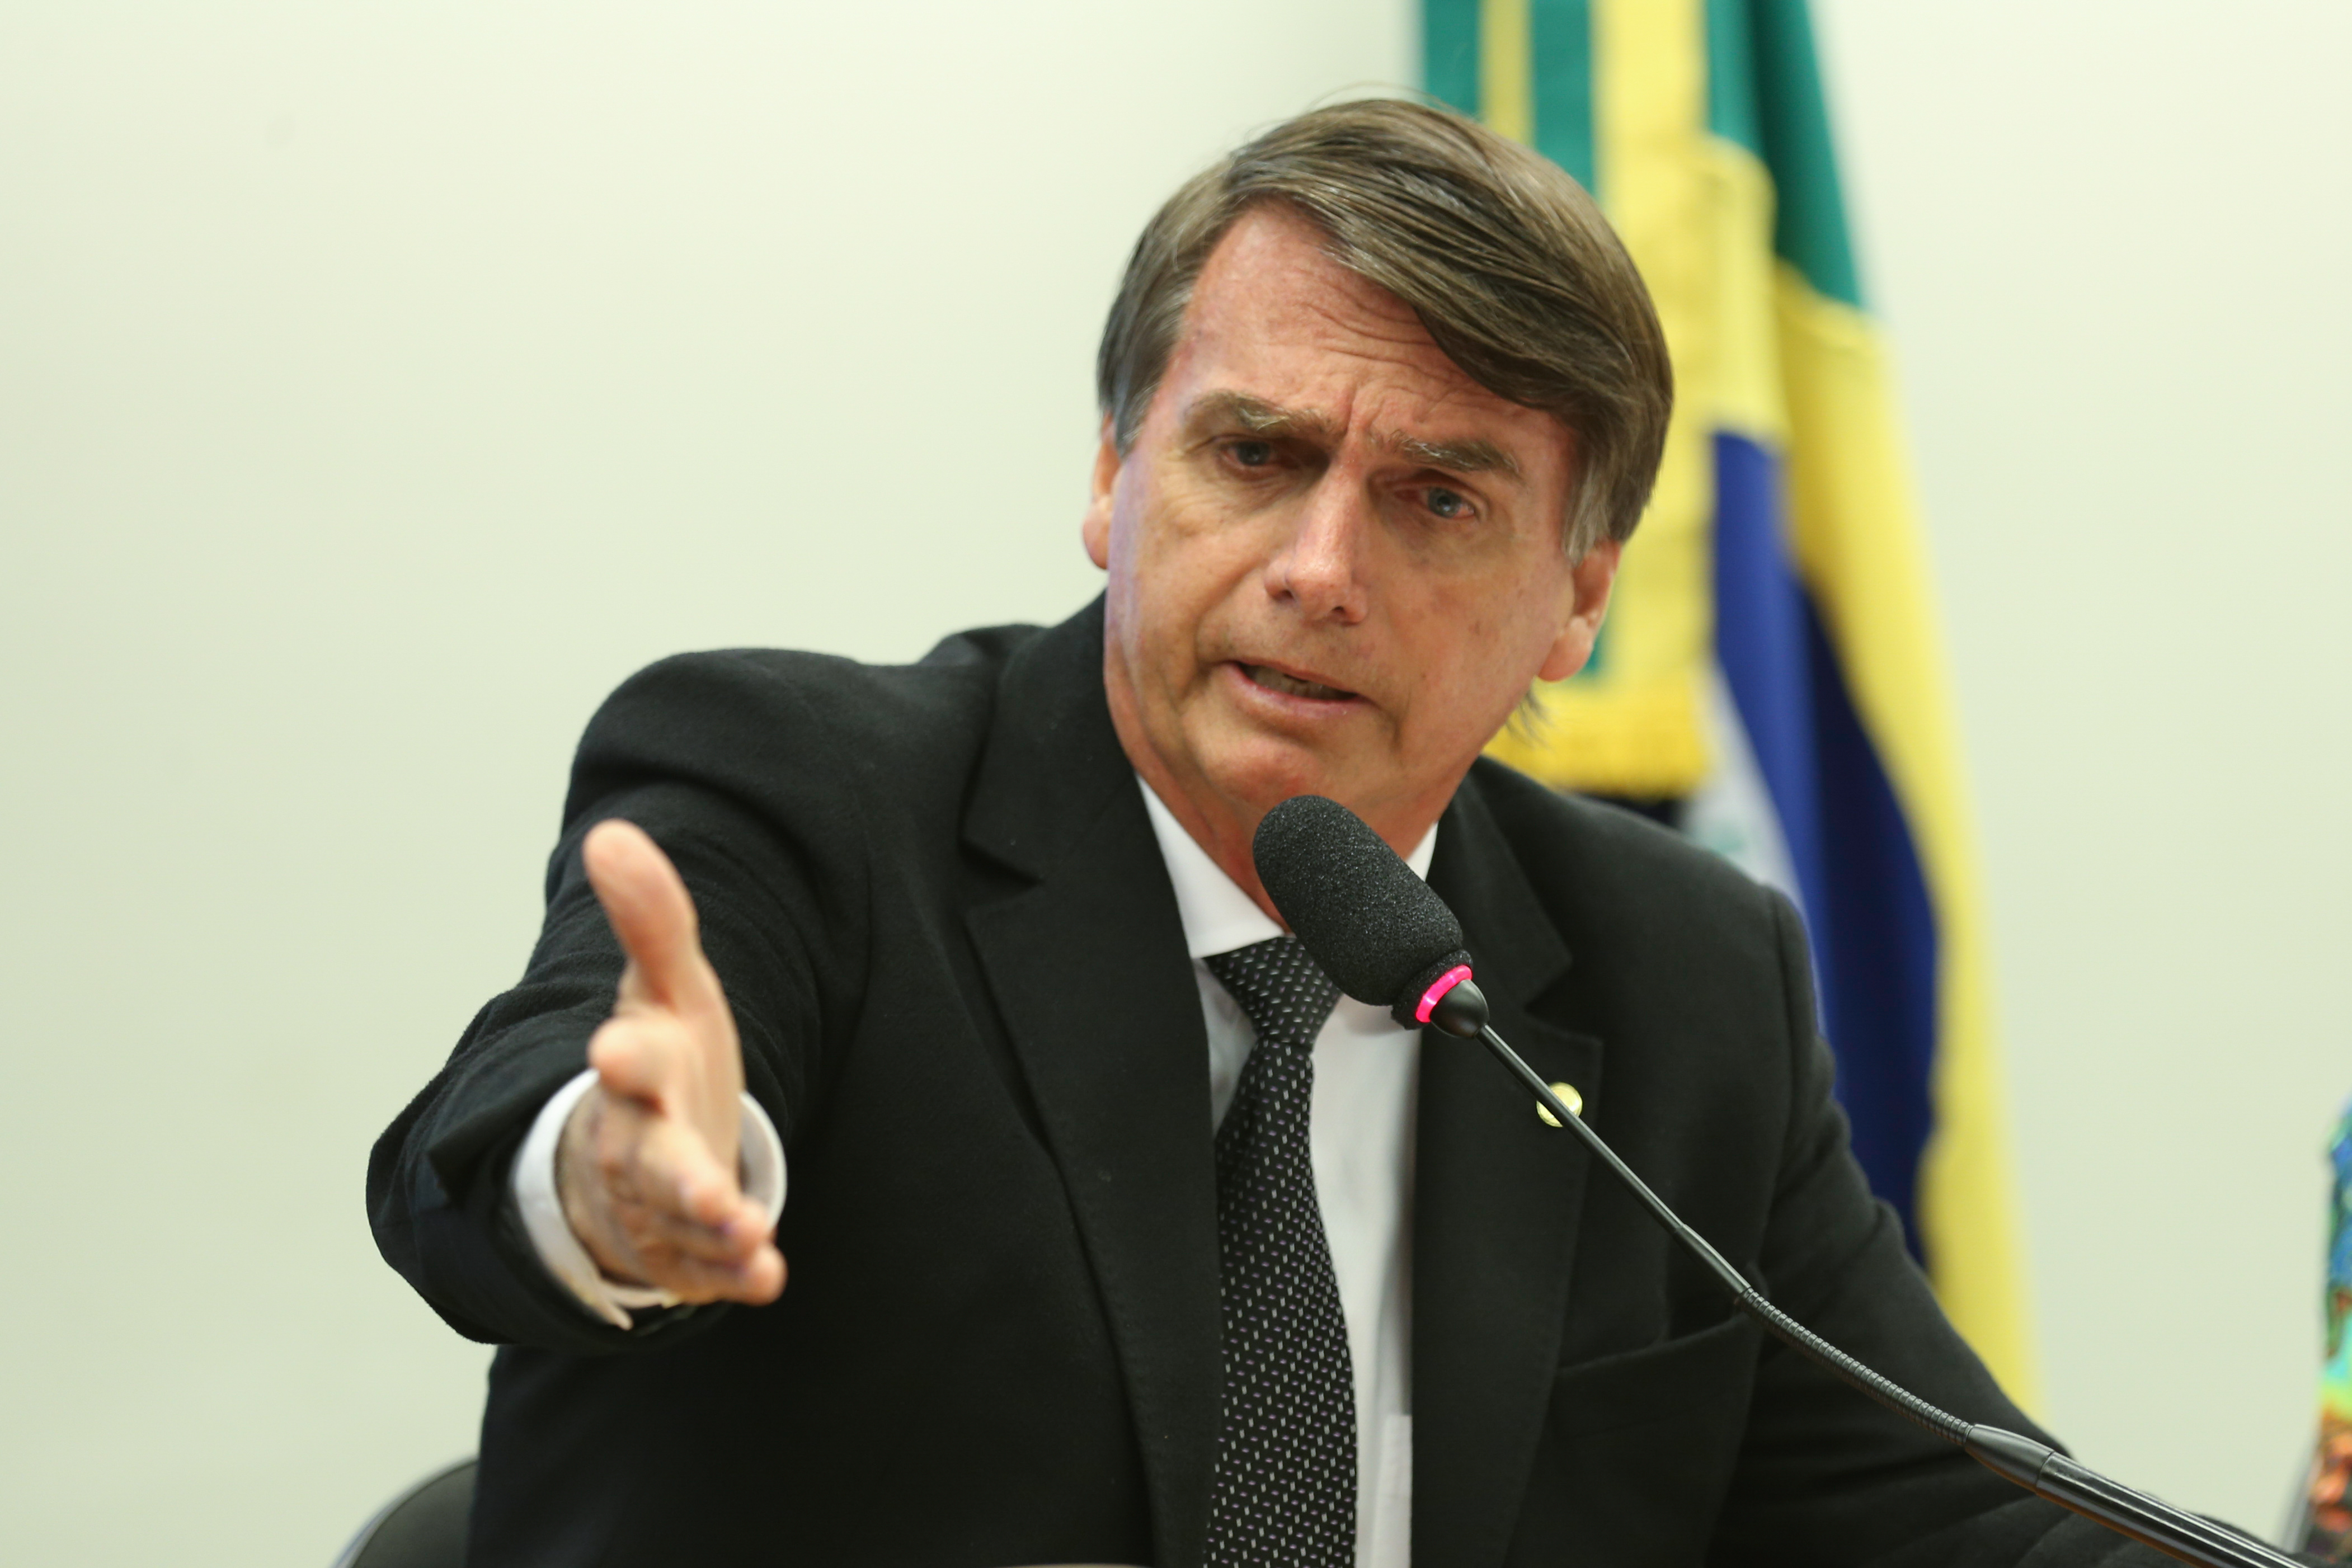 How Bolsonaro’s presidency could affect Argentina